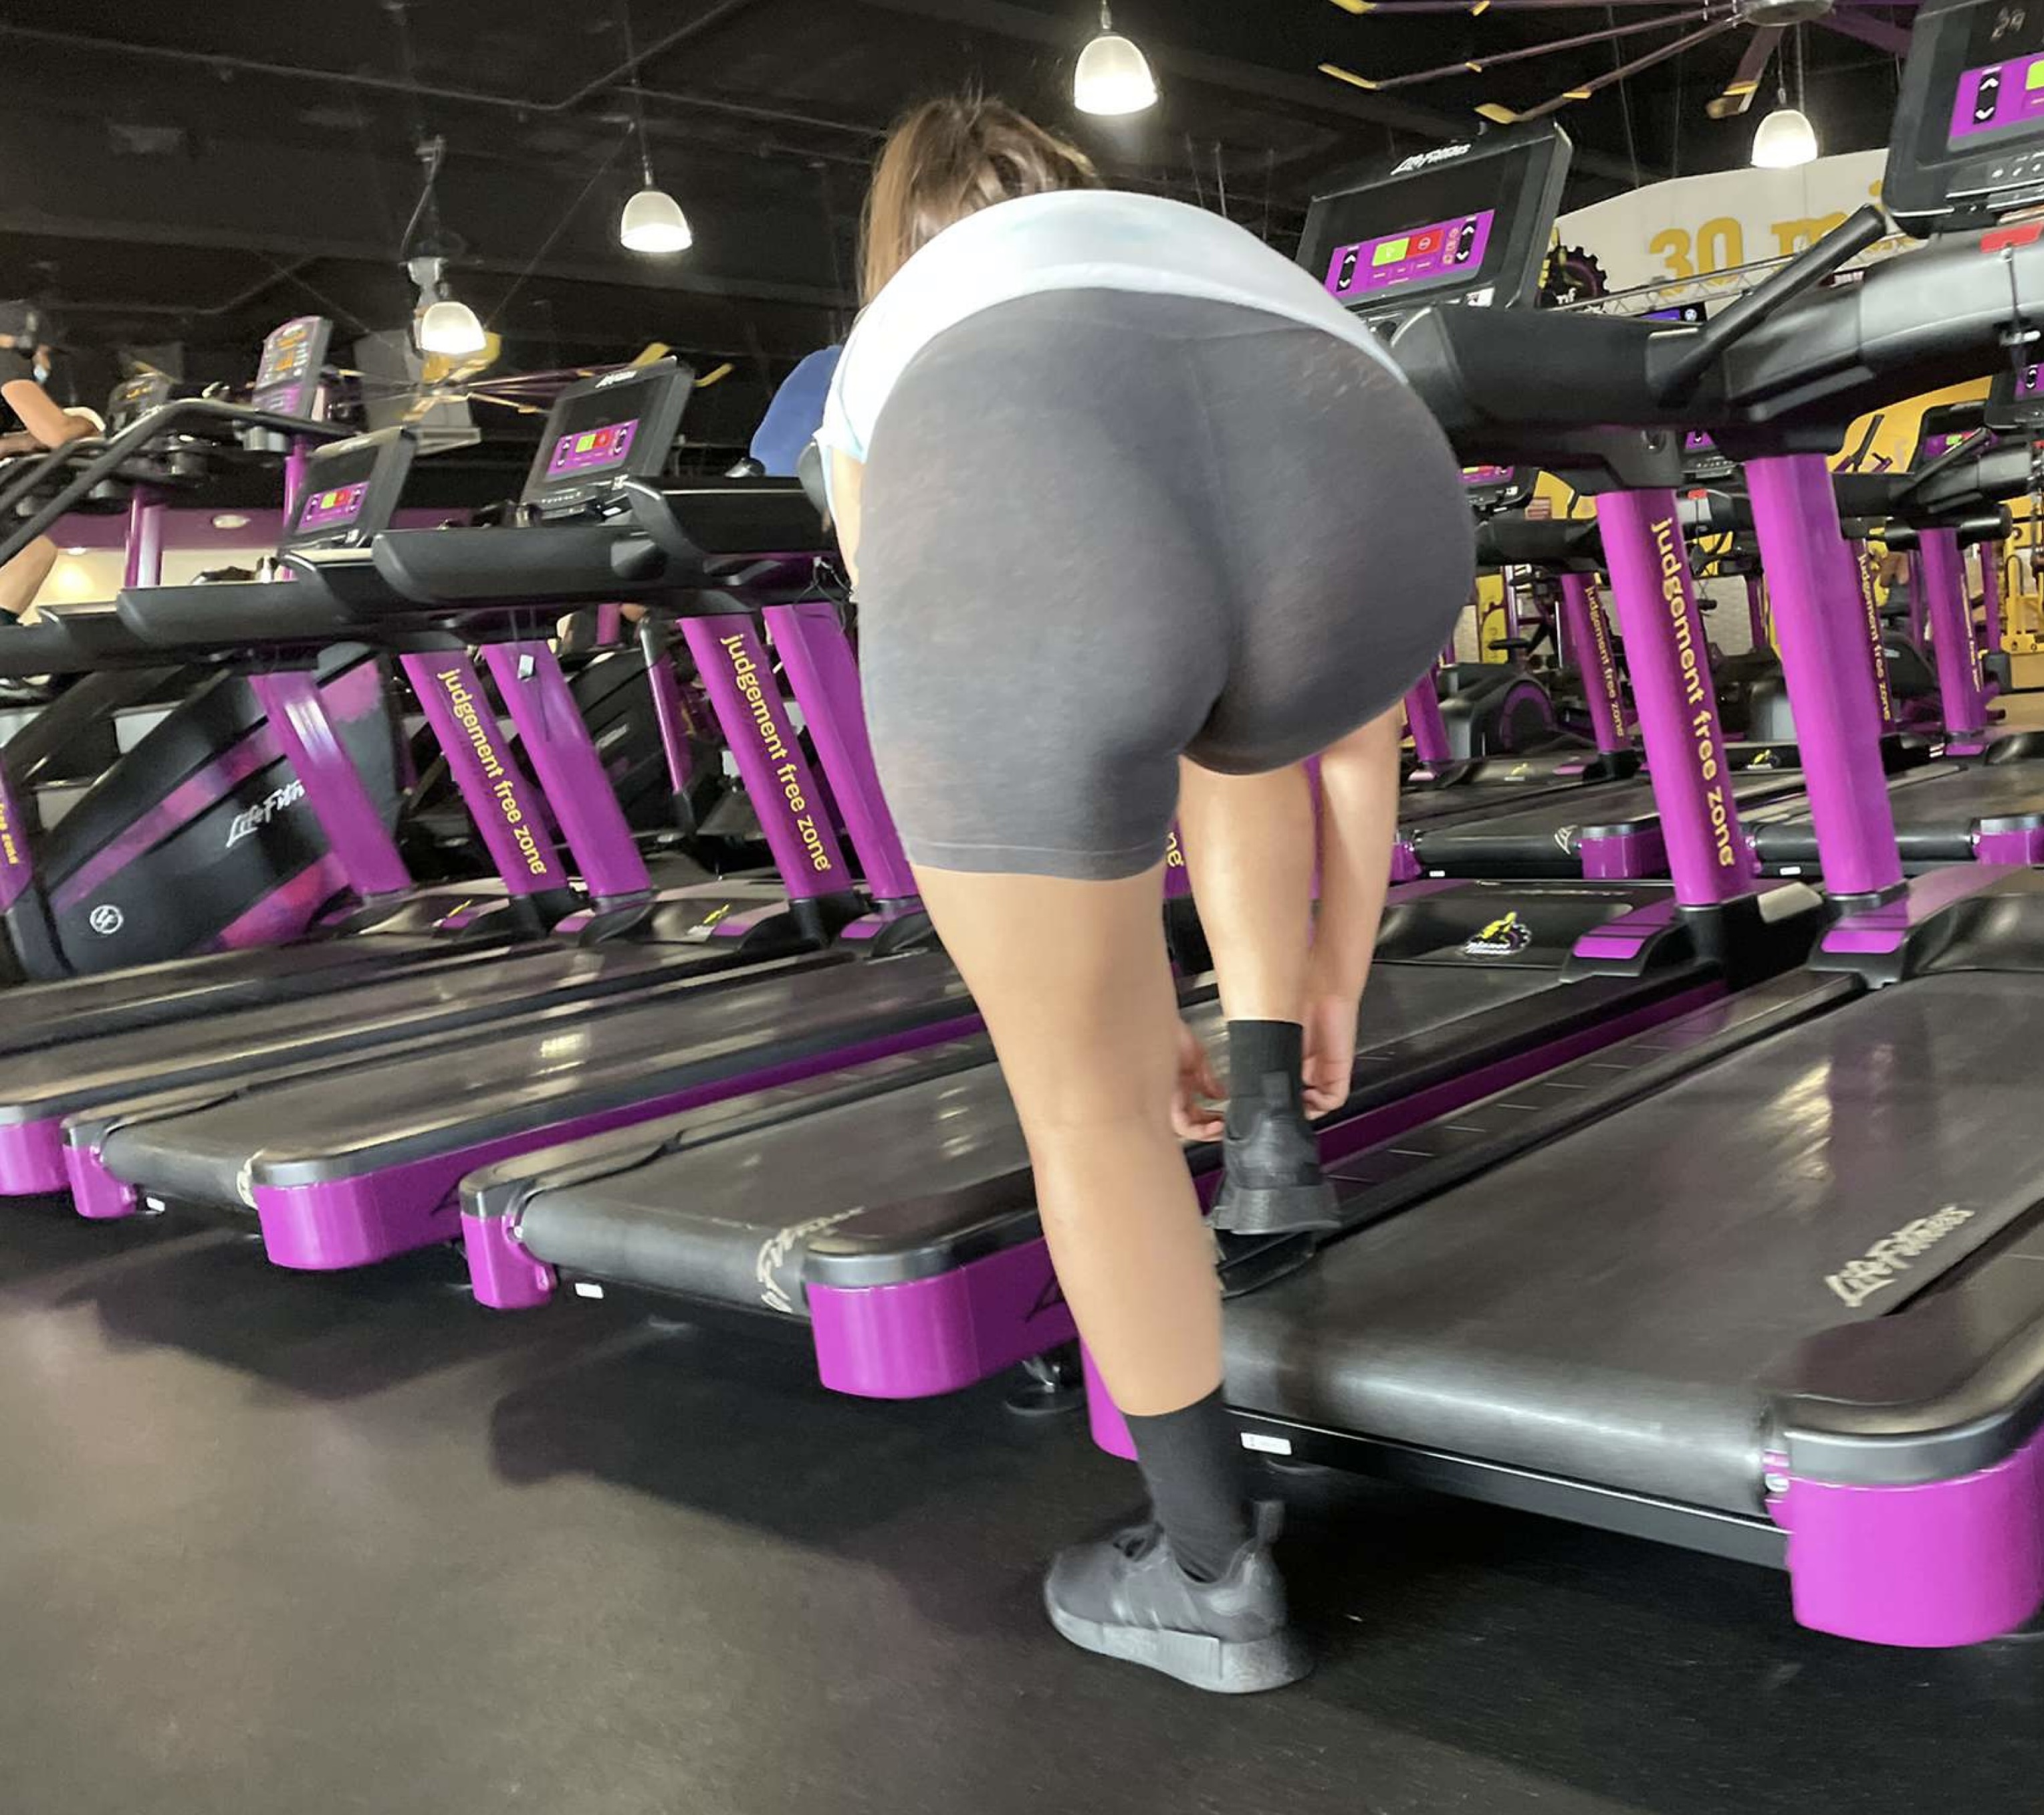 Fapwall on X: 2 months ago you encouraged me to wear this leggings to the  gym. I did it and 2 guys asked me for my number. Would you asked too? (via